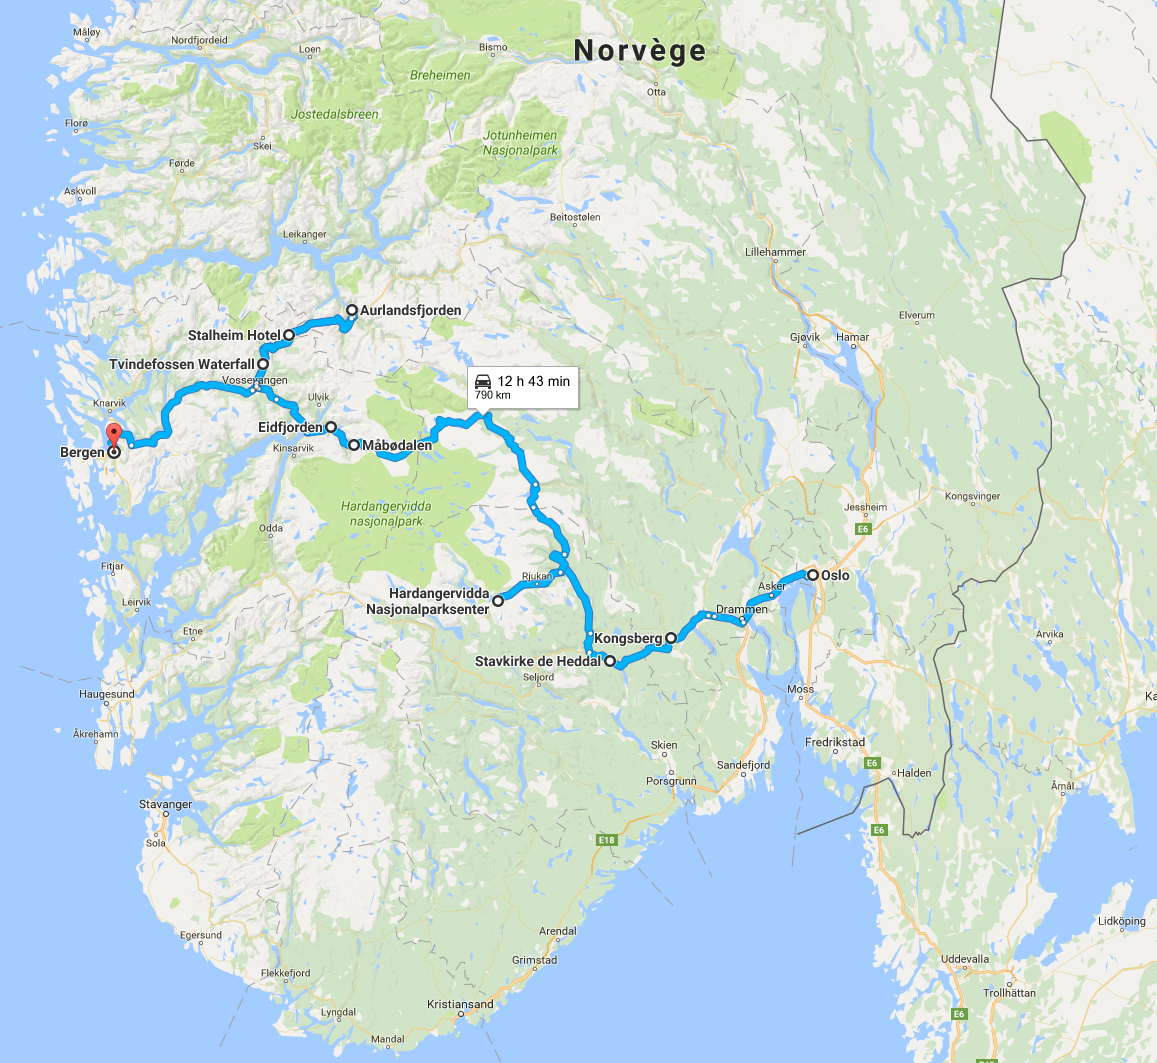 Our itinerary in Southern Norway